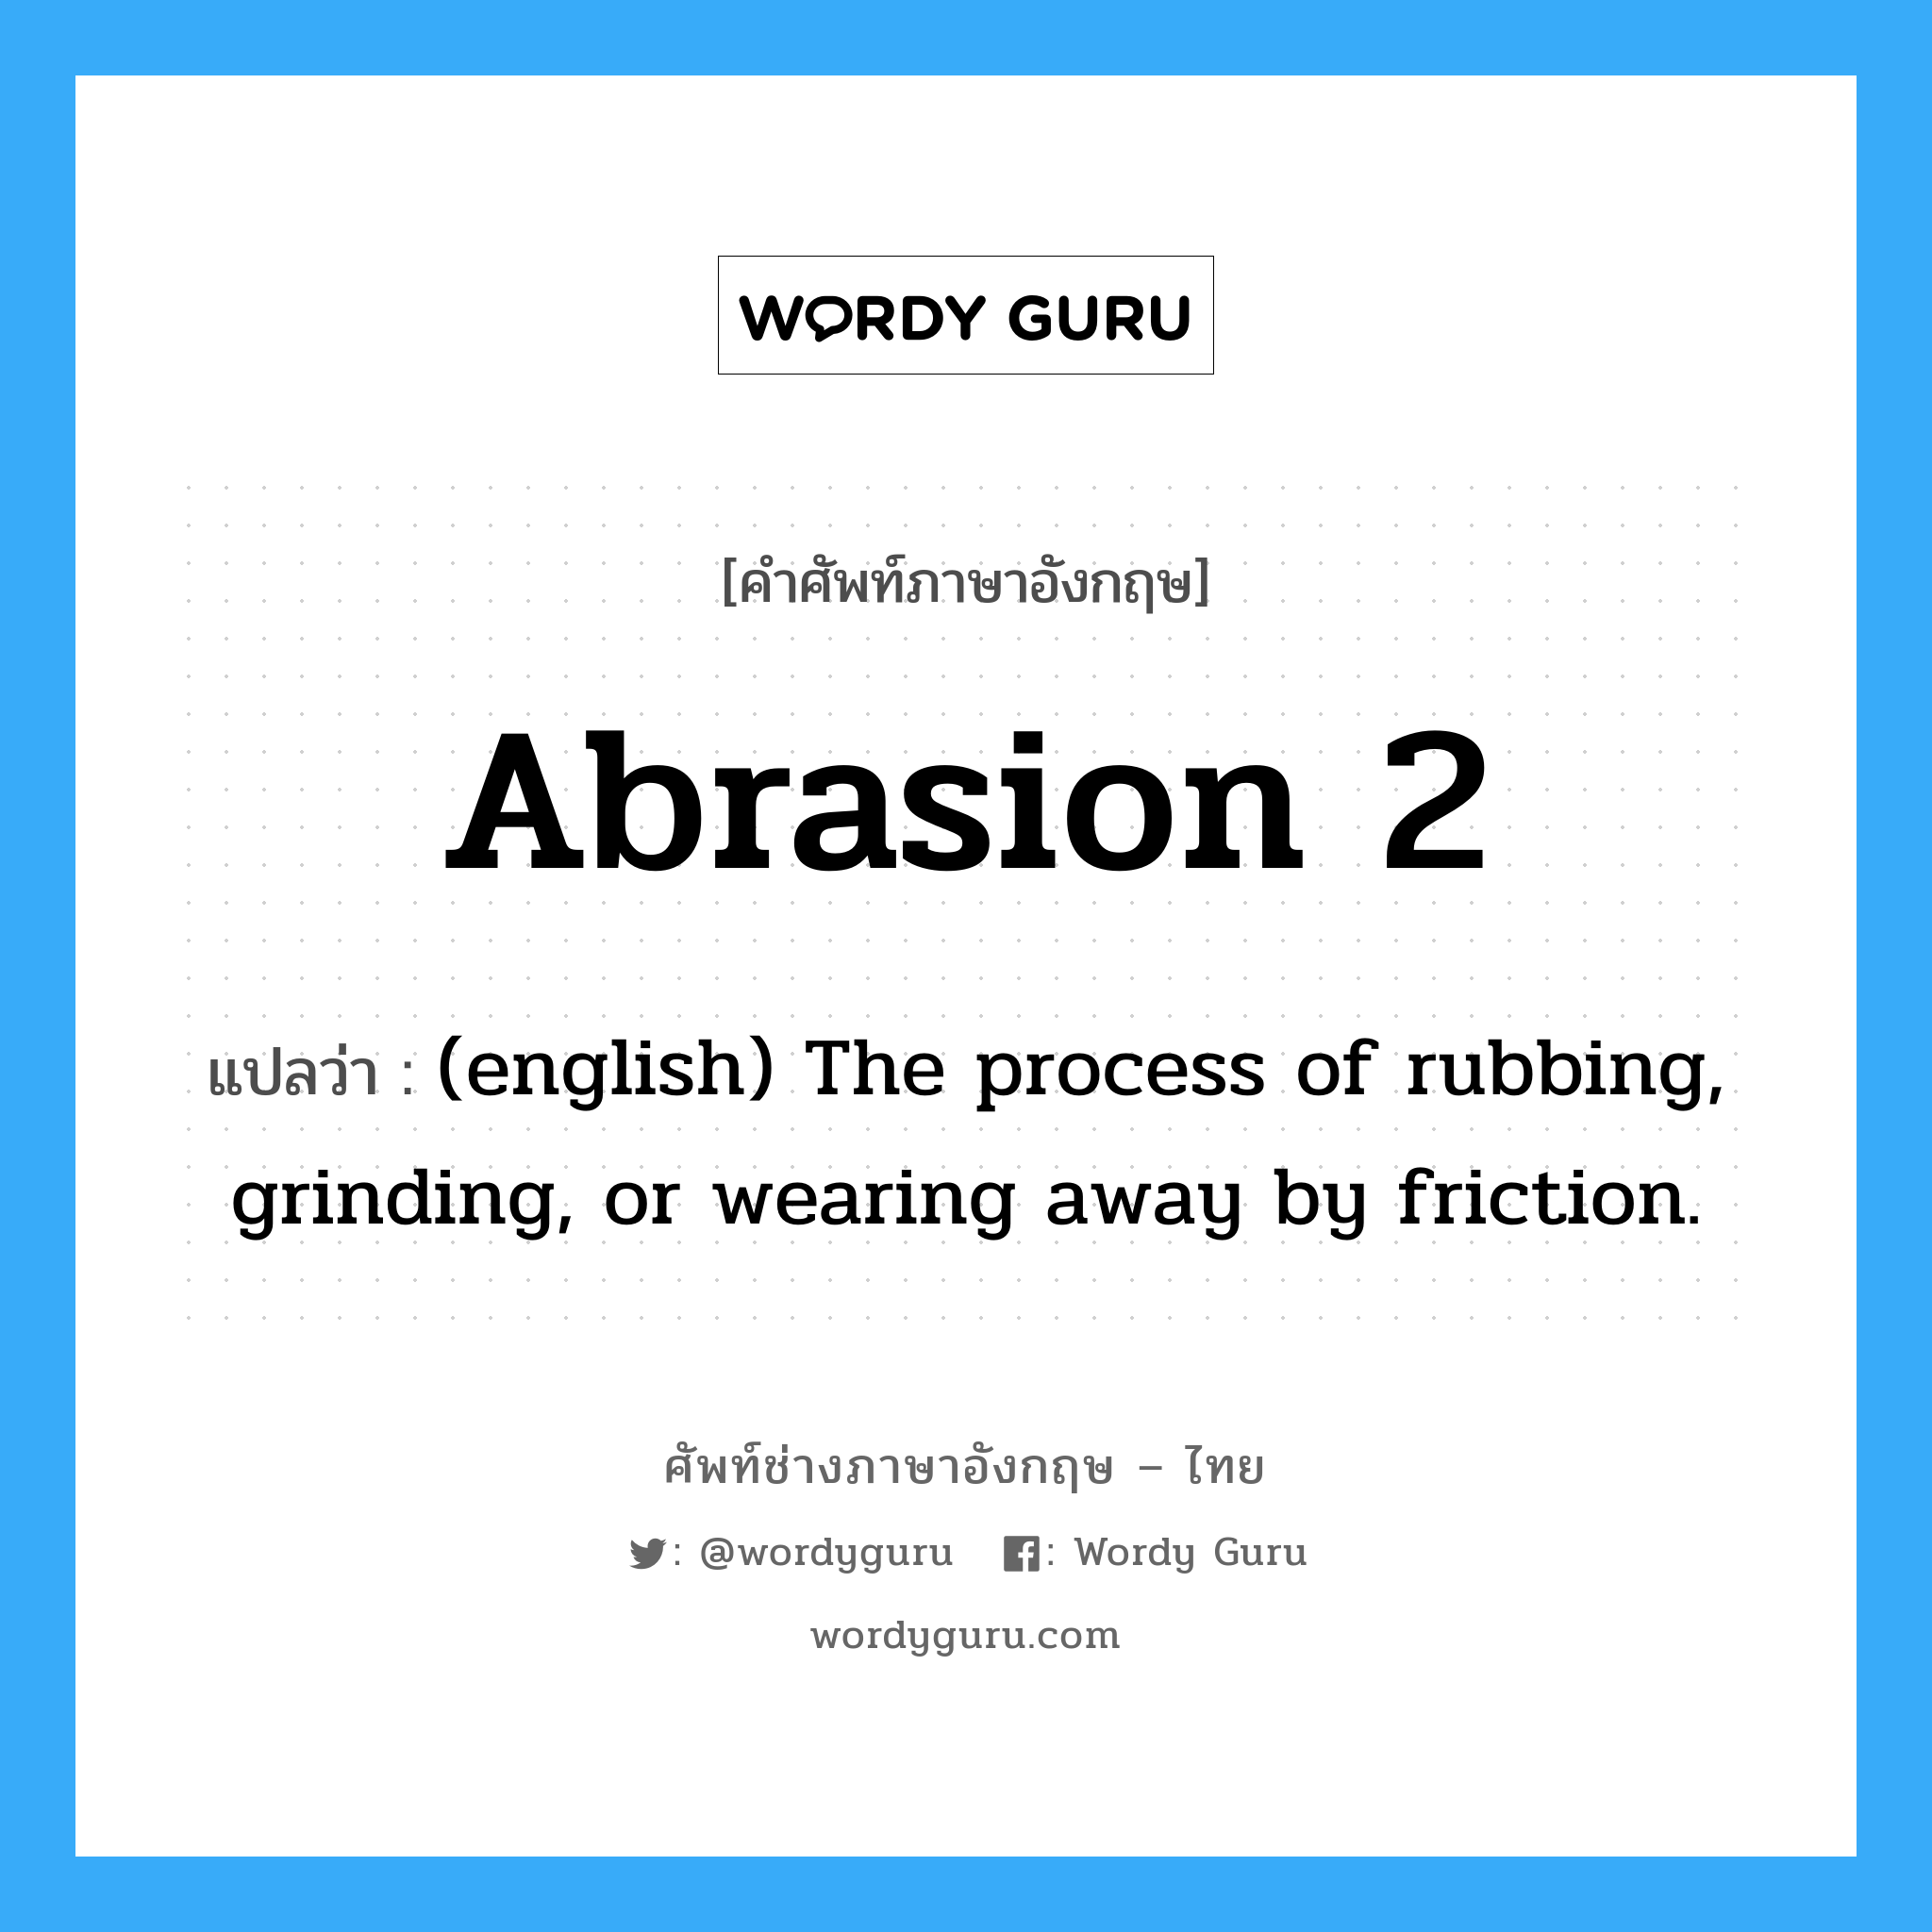 Abrasion 2 แปลว่า?, คำศัพท์ช่างภาษาอังกฤษ - ไทย Abrasion 2 คำศัพท์ภาษาอังกฤษ Abrasion 2 แปลว่า (english) The process of rubbing, grinding, or wearing away by friction.